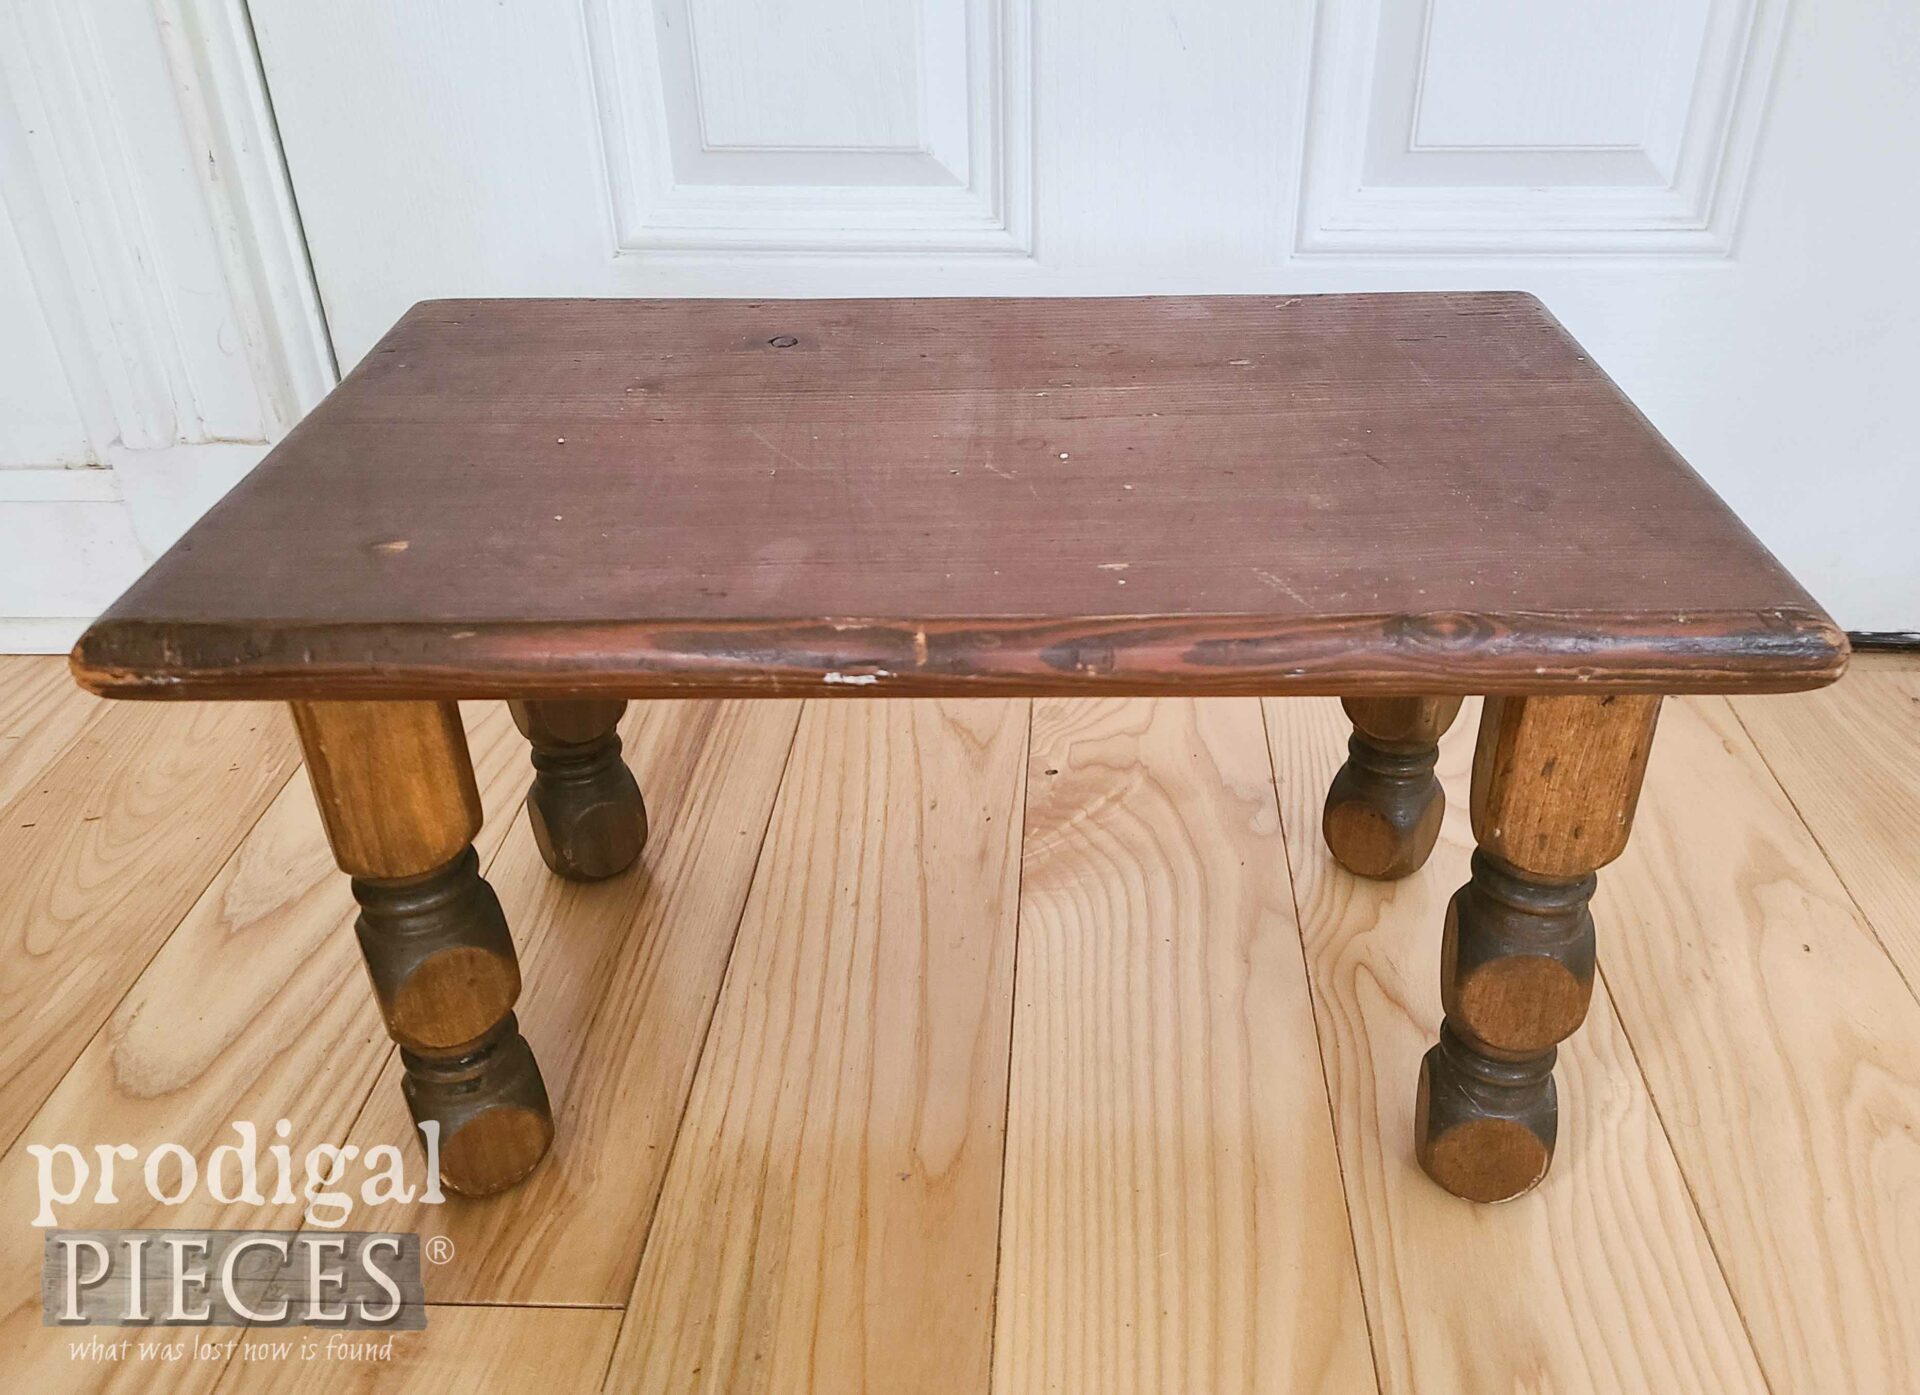 Wooden Footstool Before Makeover | prodigalpieces.com #prodigalpieces